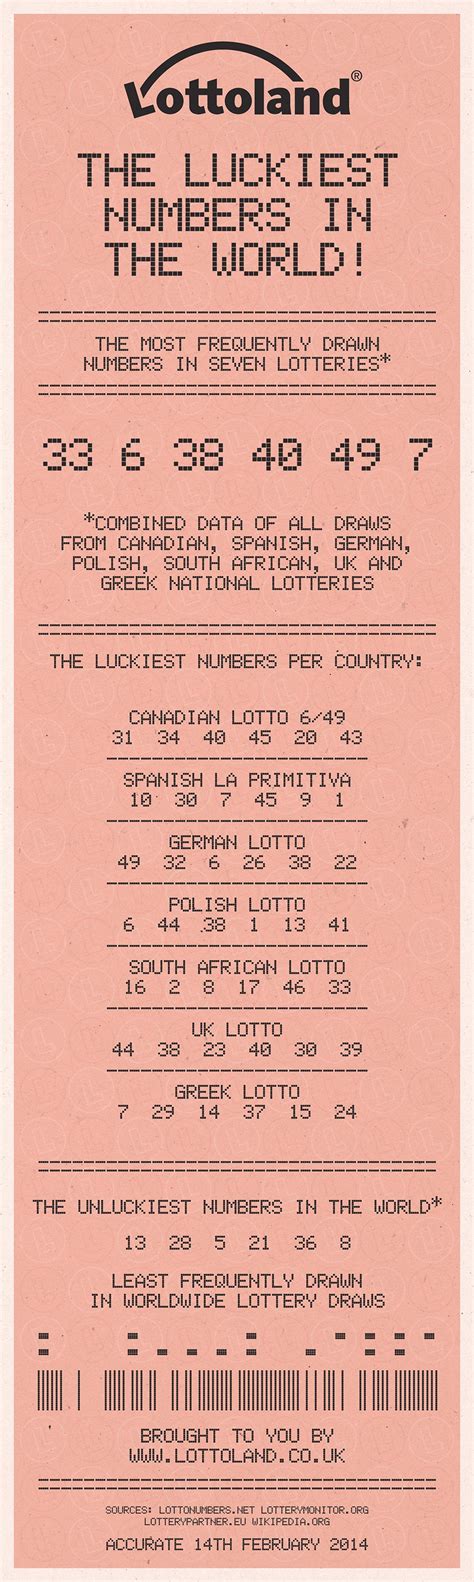 lotto lucky numbers results for yesterday